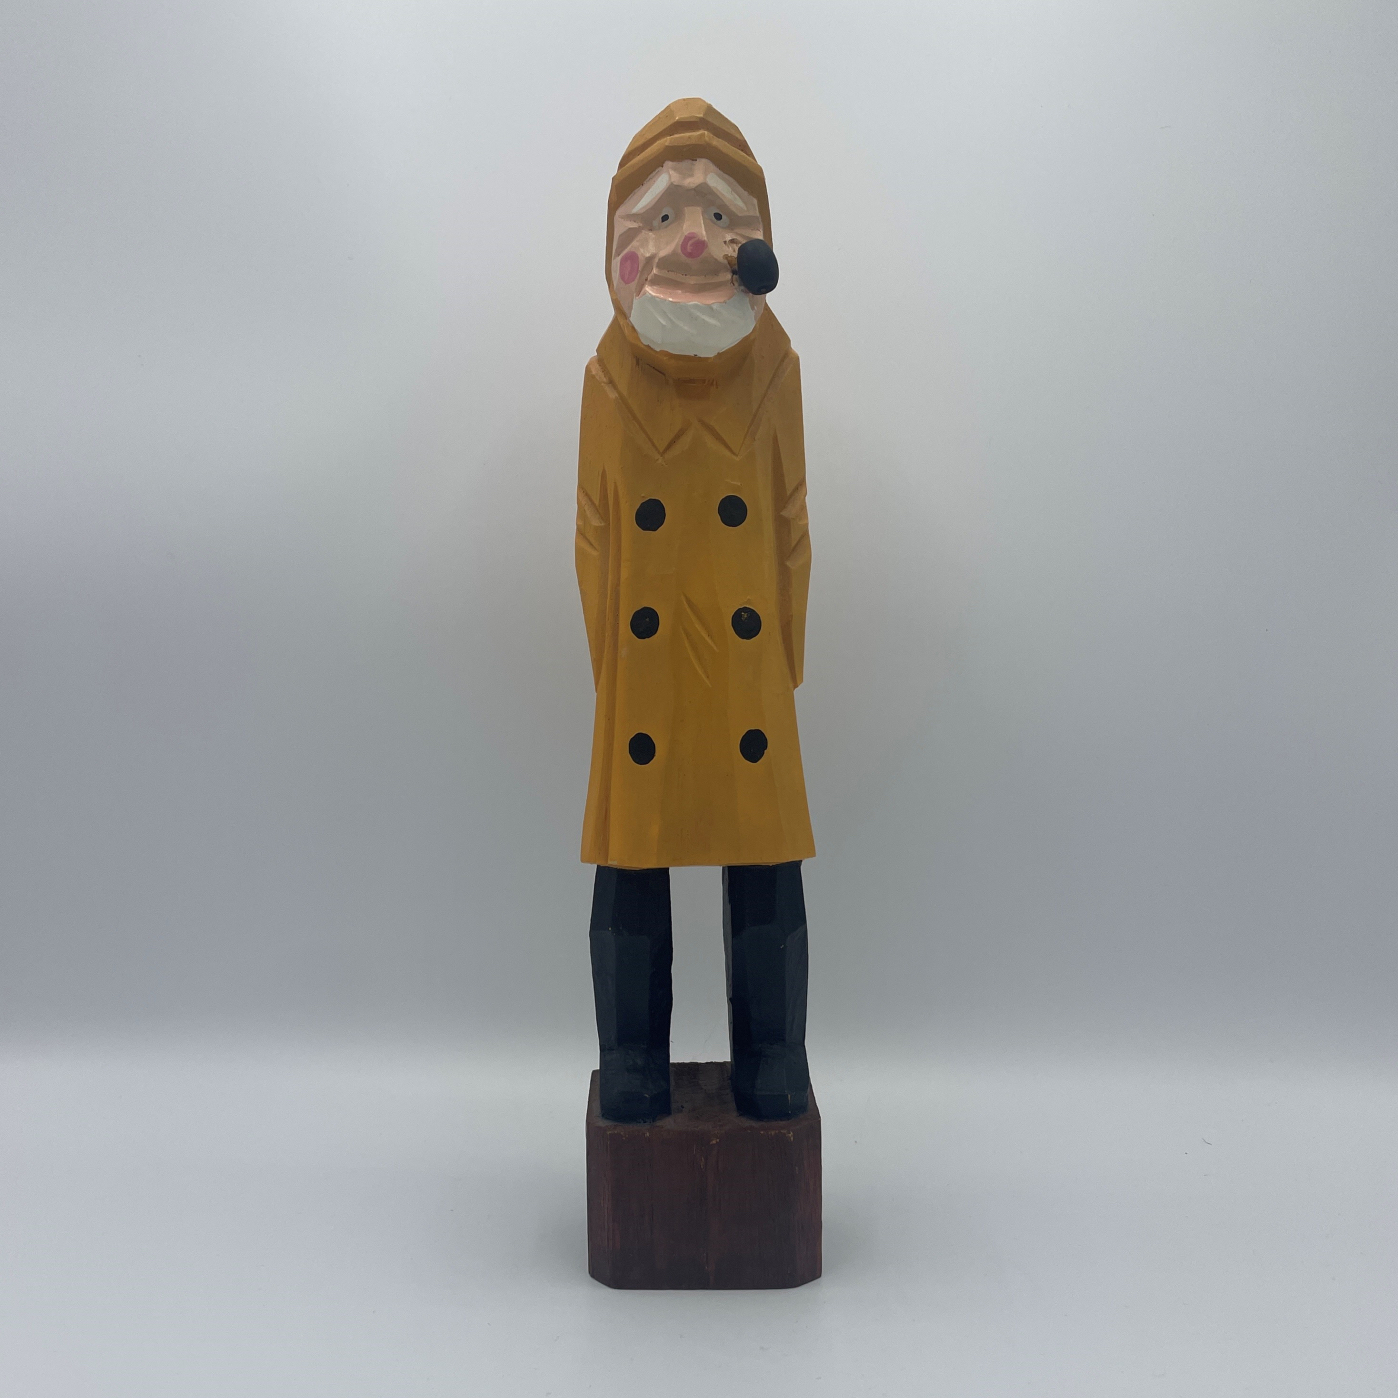 Photo of a small sculpture of a bearded old man wearing a yellow rain jacket and smoking a pipe.